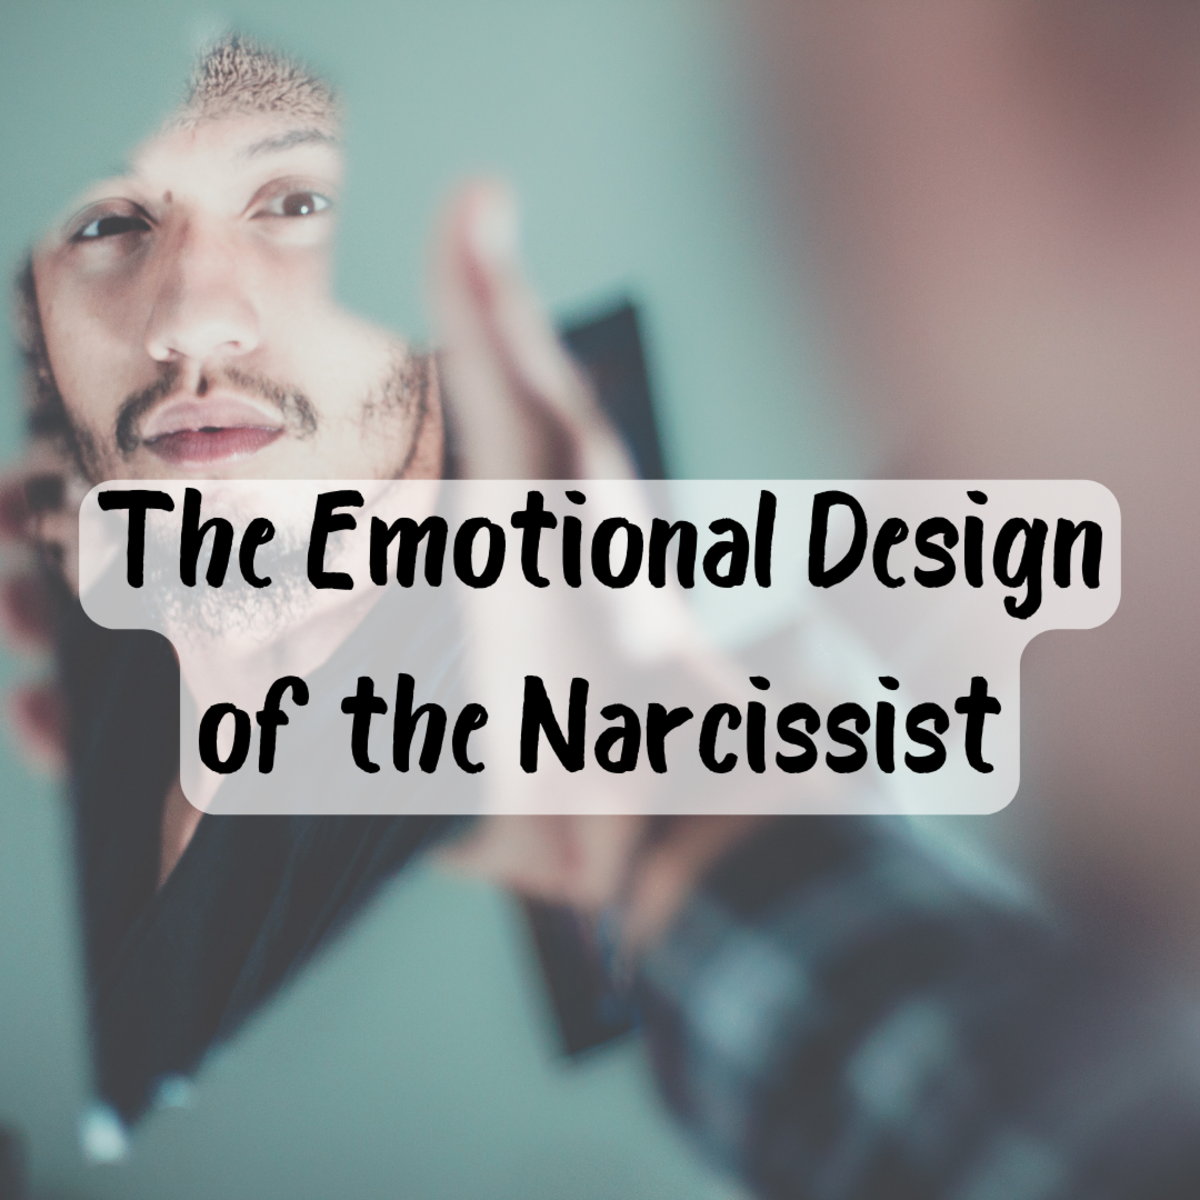 Read on to understand the emotional design of the narcissist so you can recognize, avoid, and/or escape it.